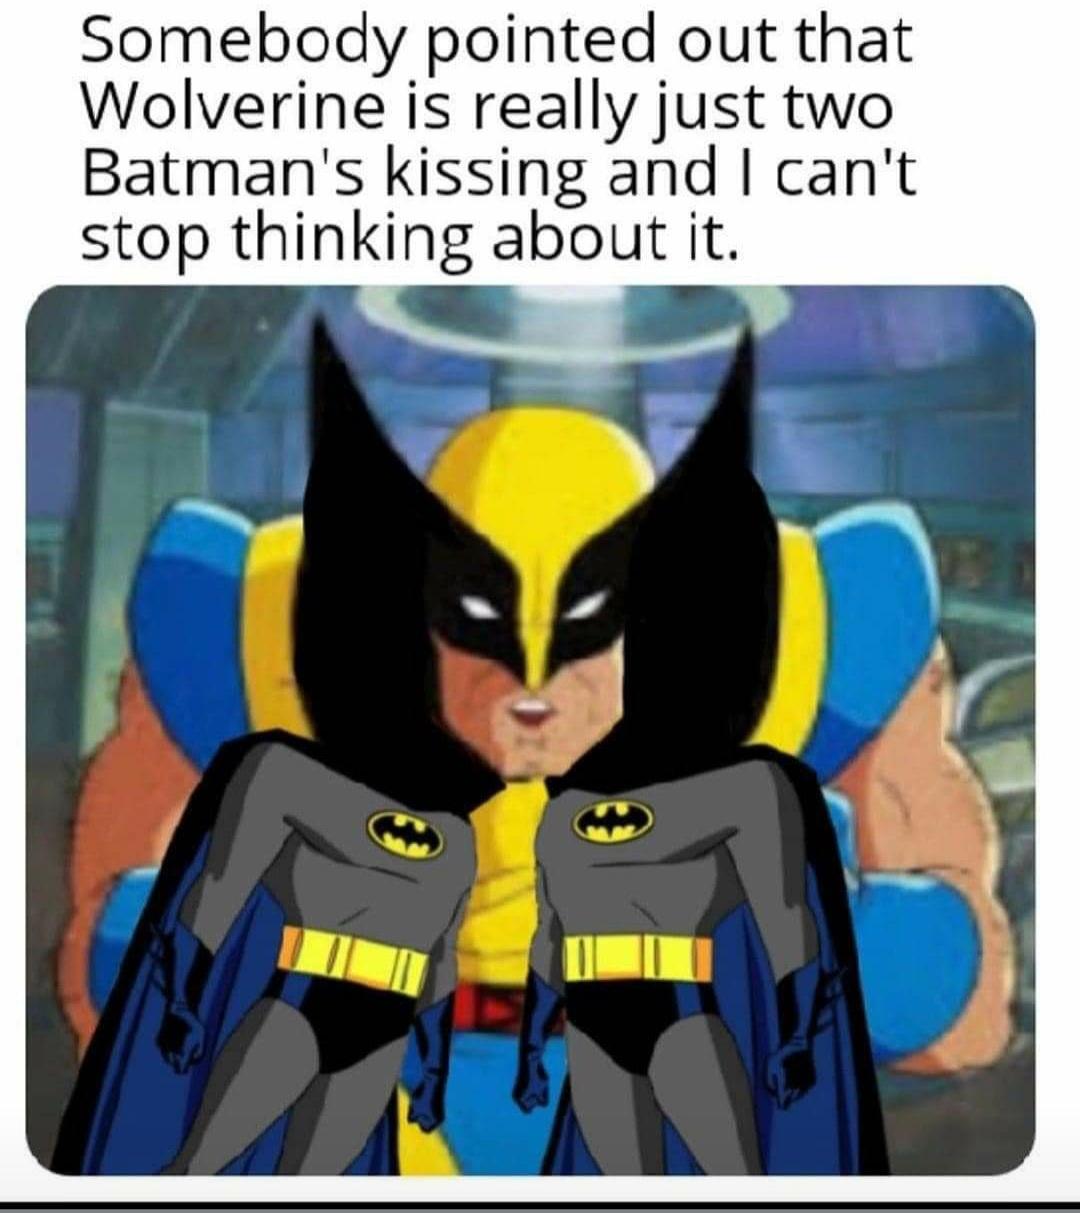 Batman - Somebody pointed out that Wolverine is really just two Batman's kissing and I can't stop thinking about it.